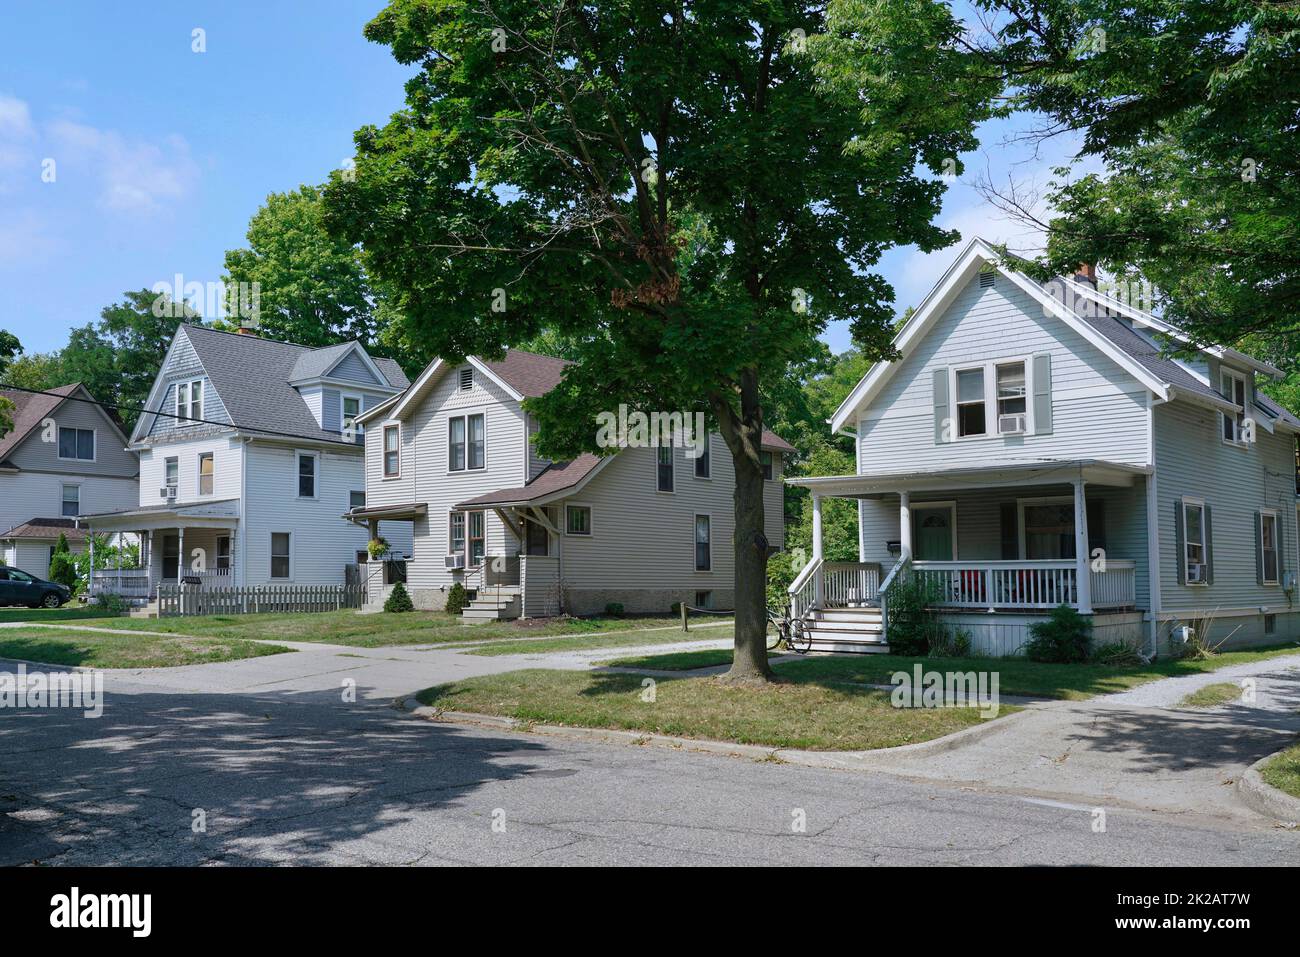 Residential street with traditional detached two story houses covered in siding or clapboard Stock Photo